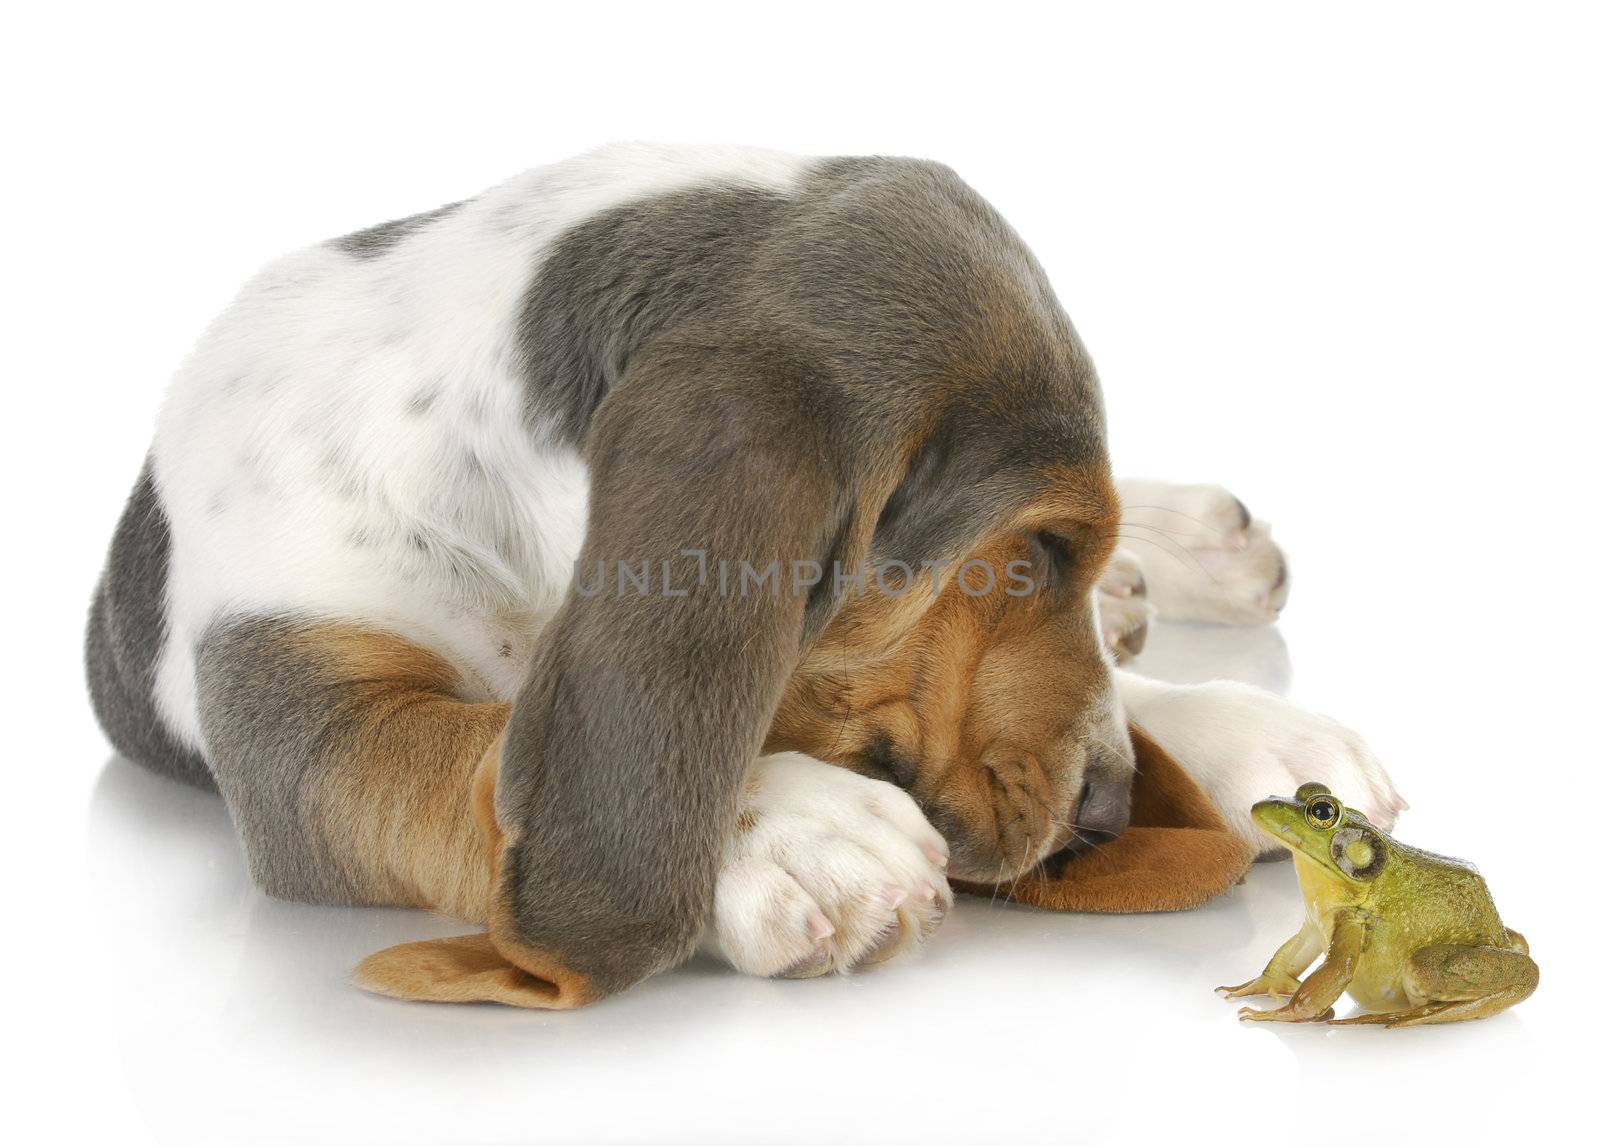 dog and frog by willeecole123